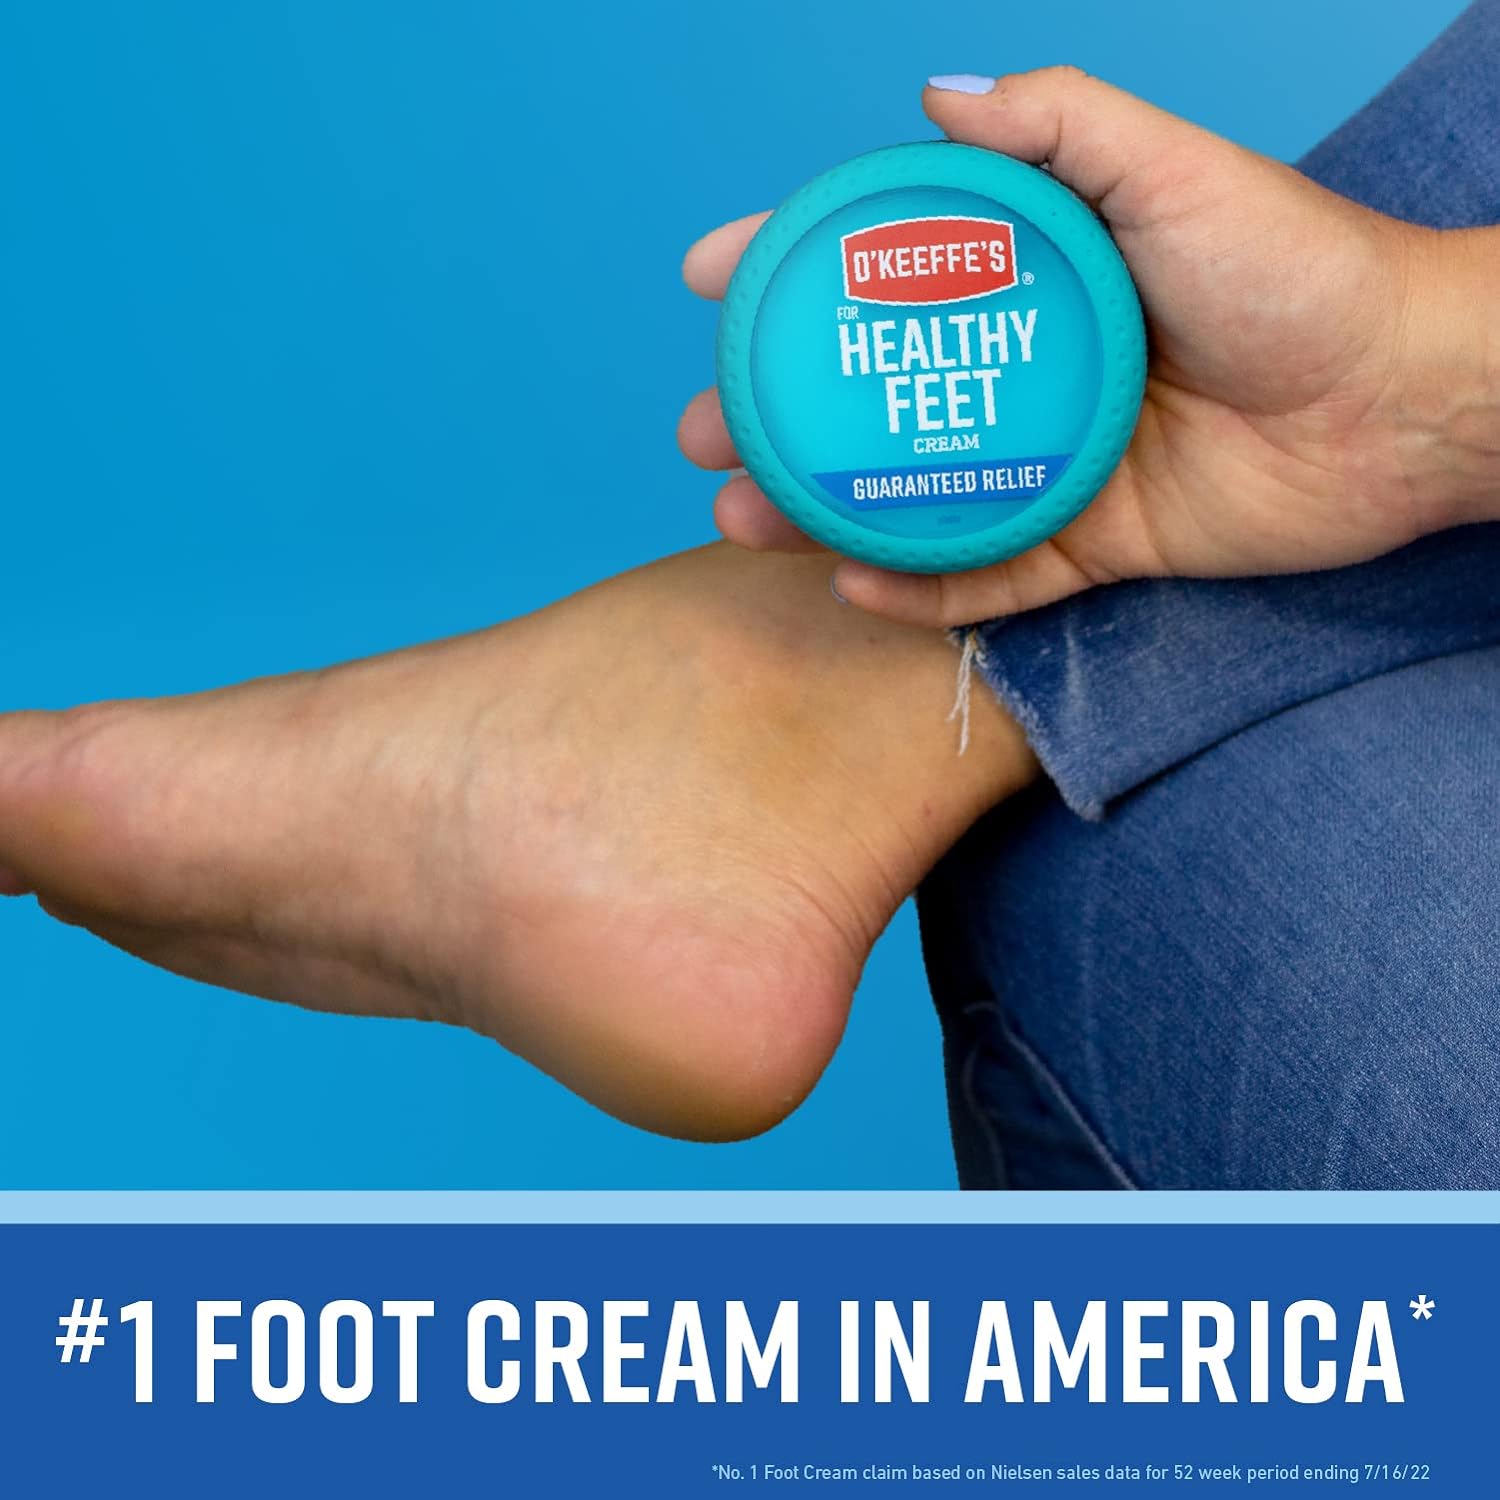 O'Keeffe's for Healthy Feet Foot Cream, Guaranteed Relief for Extremely Dry, Cracked Feet, Instantly Boosts Moisture Levels, 3.2 Ounce Jar, (Pack of 2) : Beauty & Personal Care